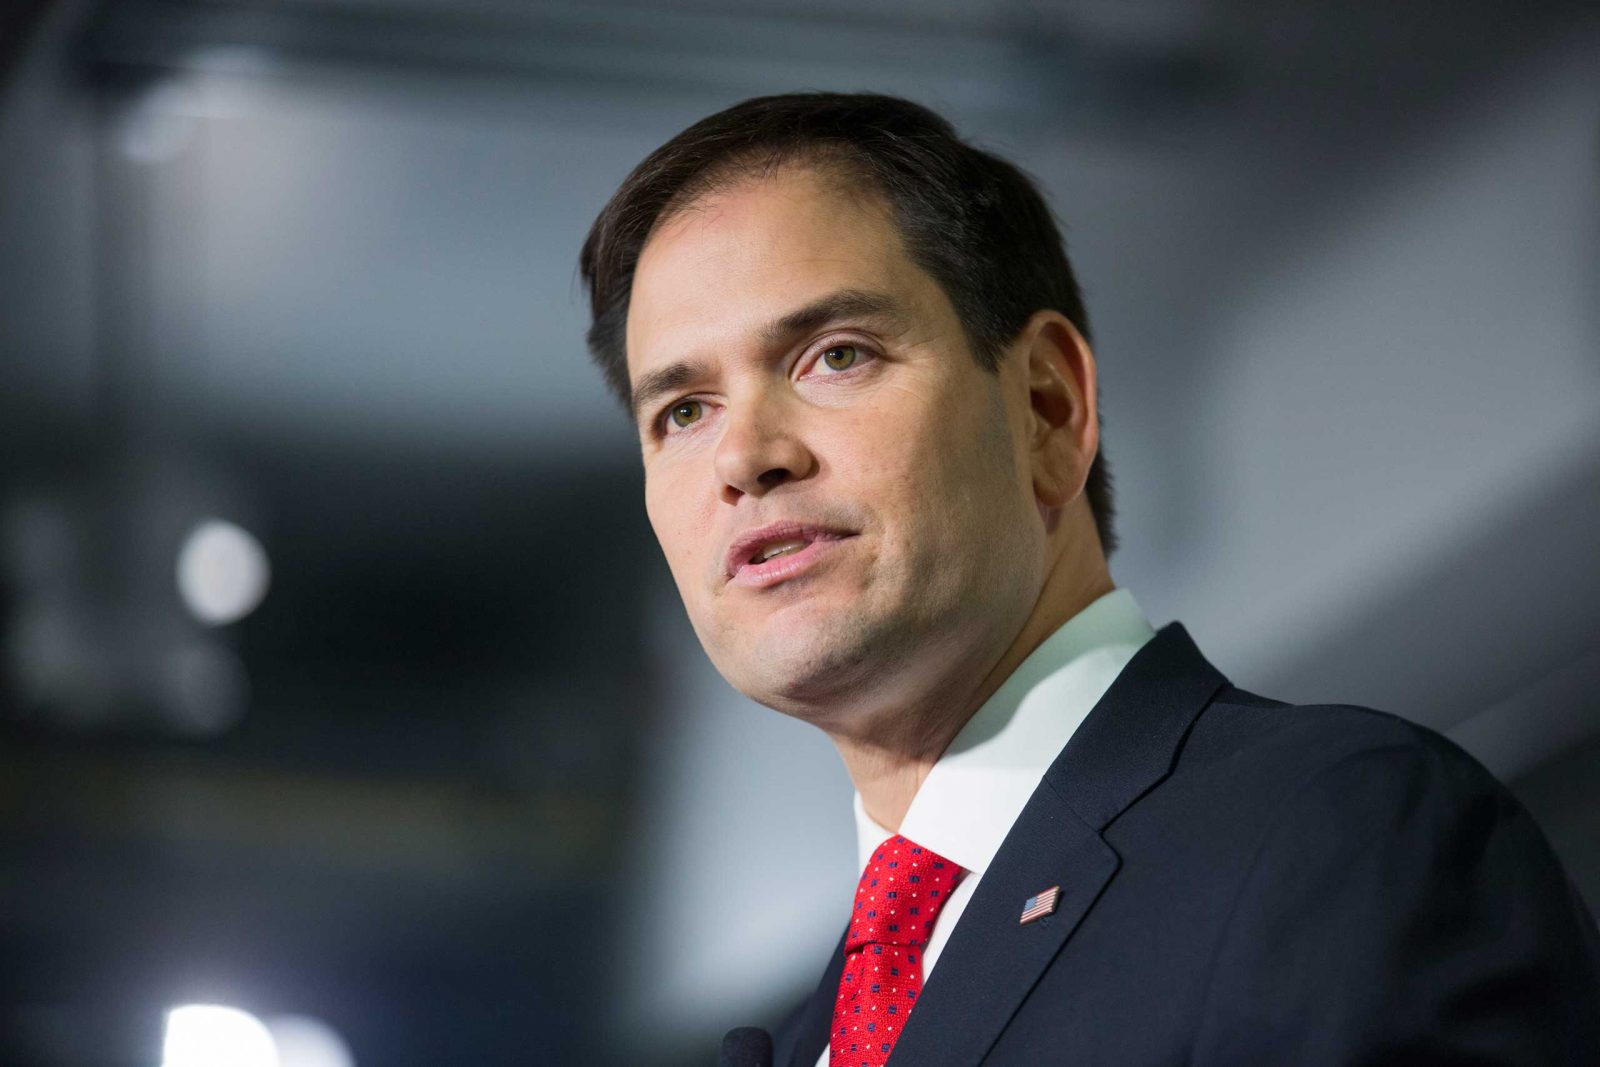 Can You Pass an 8th Grade Civics Test from 1954? Senator Rubio speaks on the economy